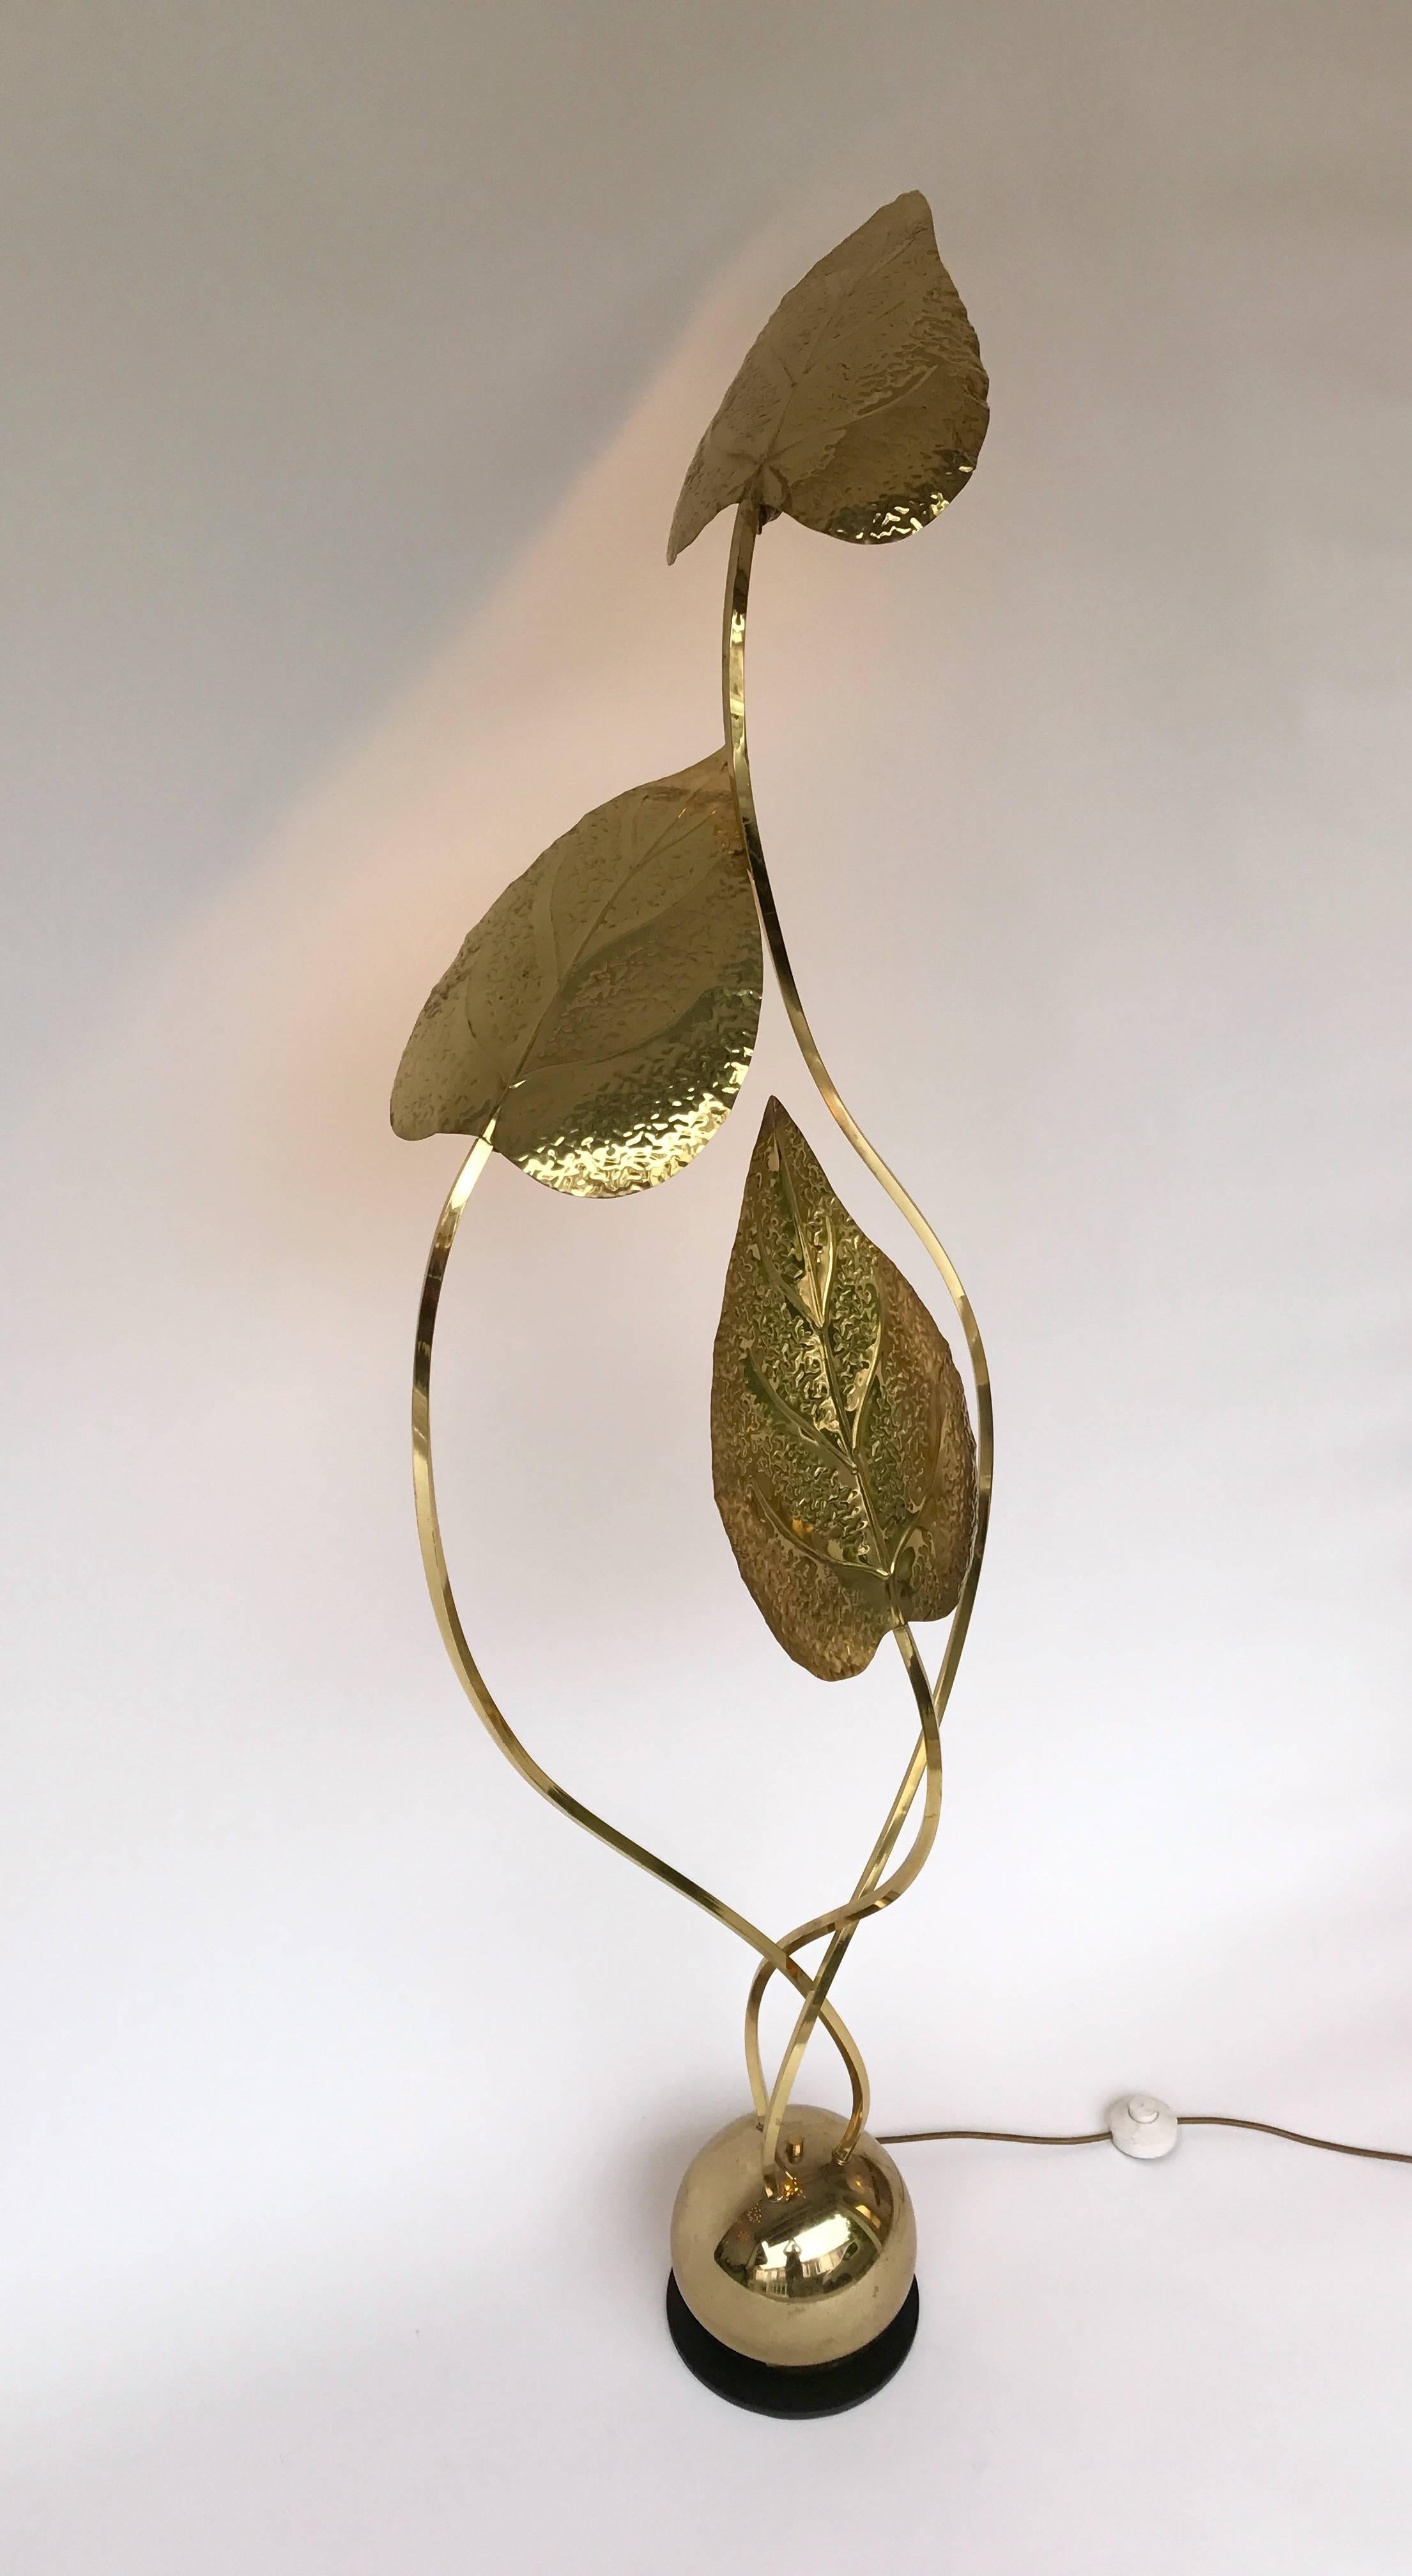 Nice model of Tommaso Barbi brass vegetal floor lamp. Interesting and decorative ball base. The leaves can be disassembled for shipping. Famous manufacture like Maison Jansen for the palm sconces and tree or Maison Baguès.